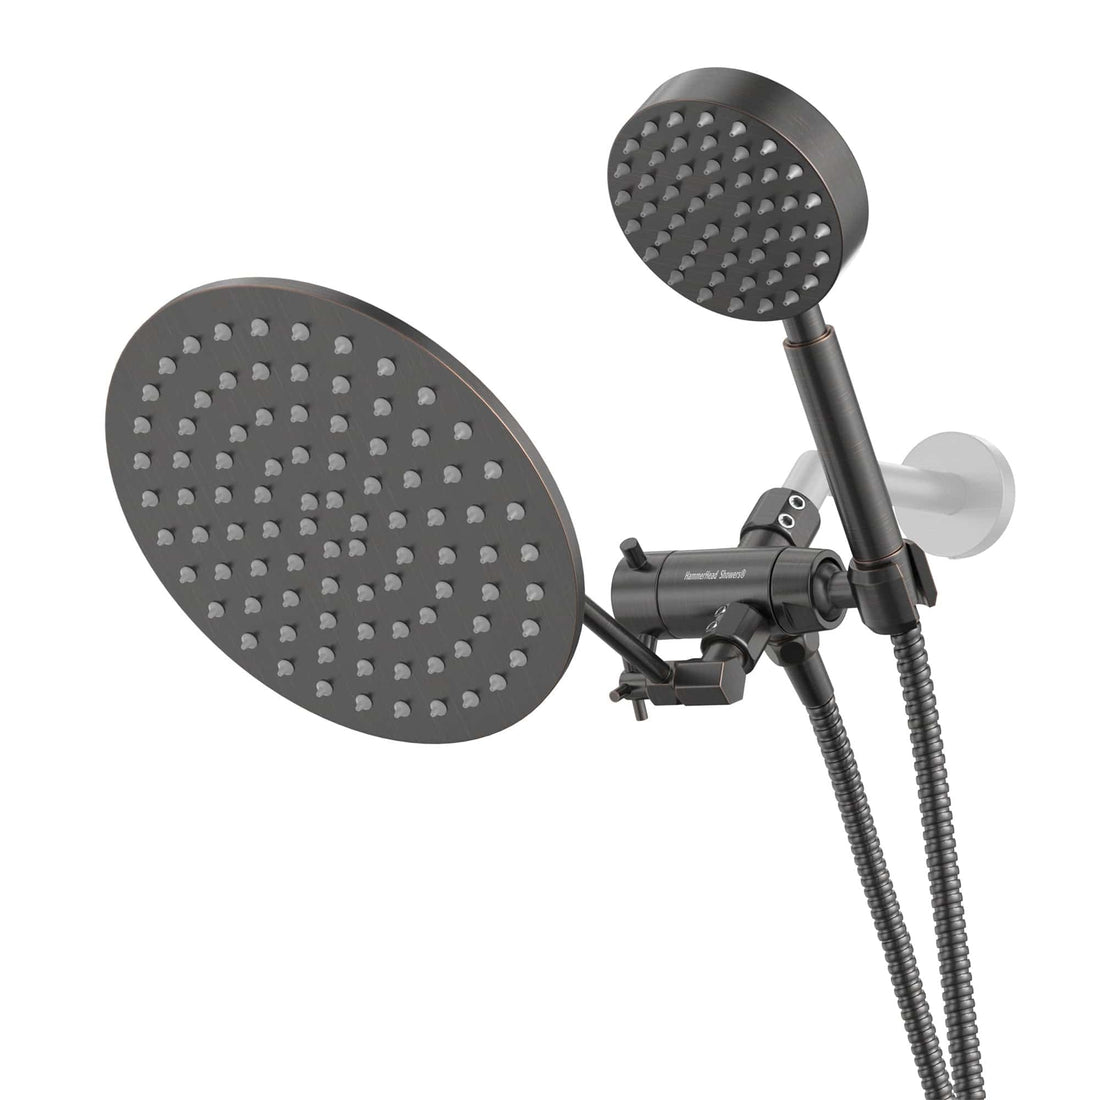 Main Image 1-Spray Dual with Adjustable Arm Oil Rubbed Bronze / 2.5 - The Shower Head Store